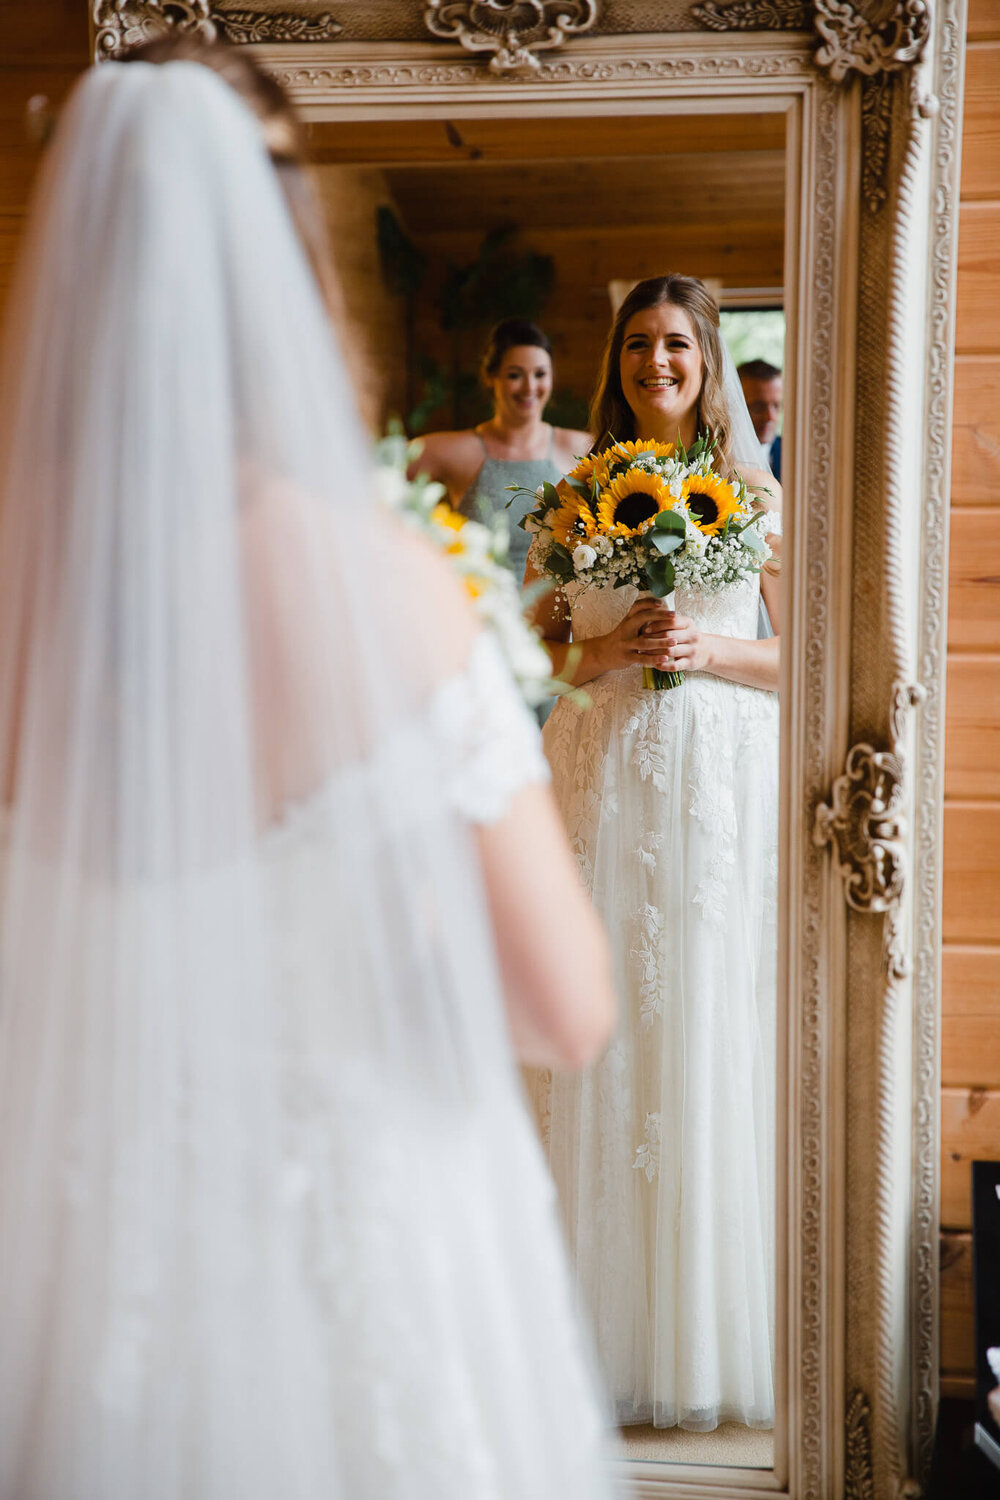 bride occupy bouquet while smiling in mirror